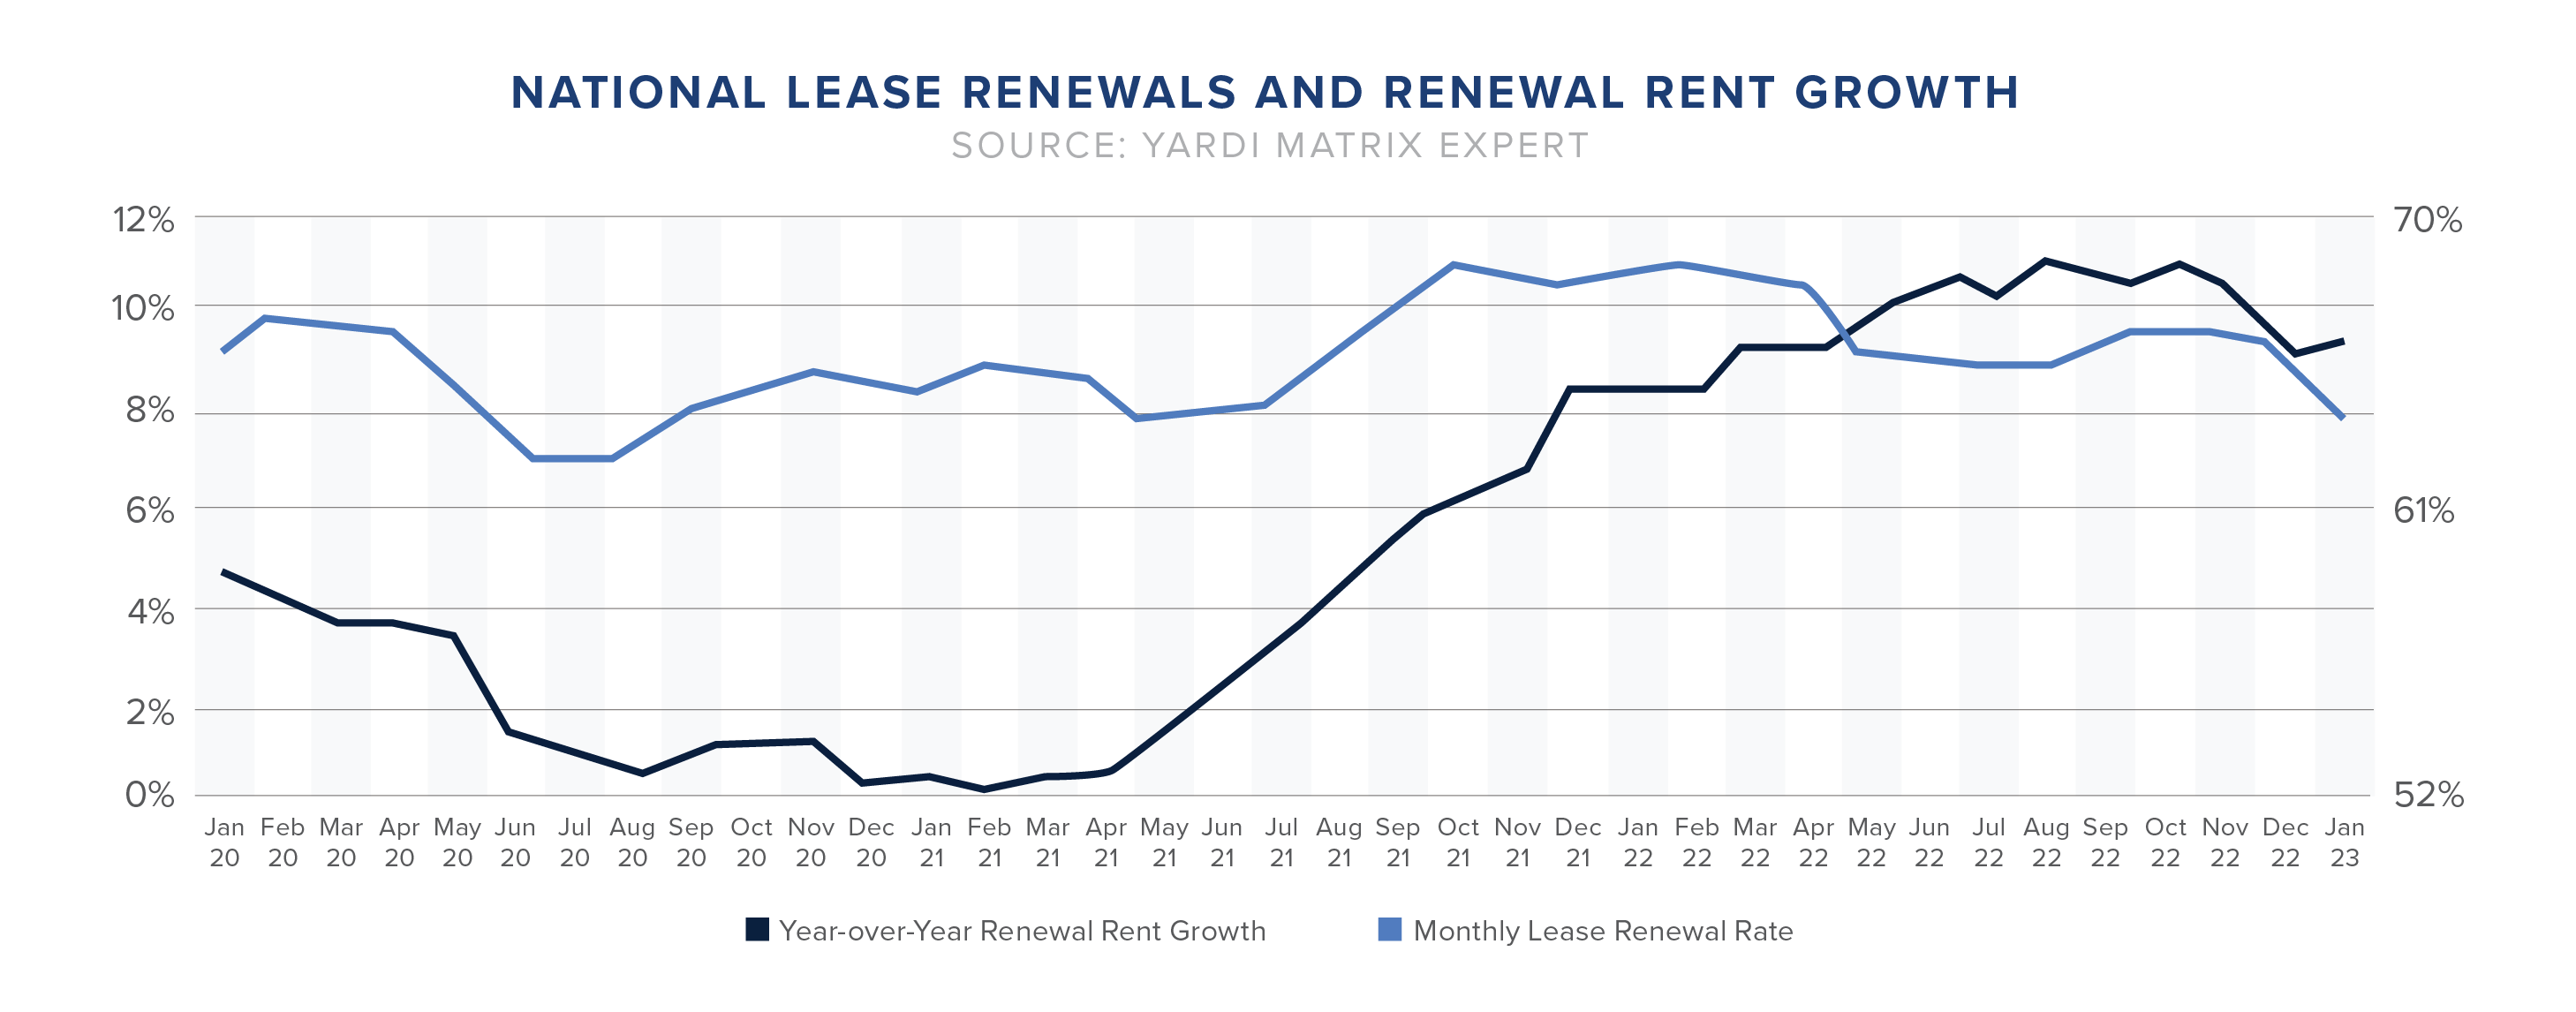 national lease renewals